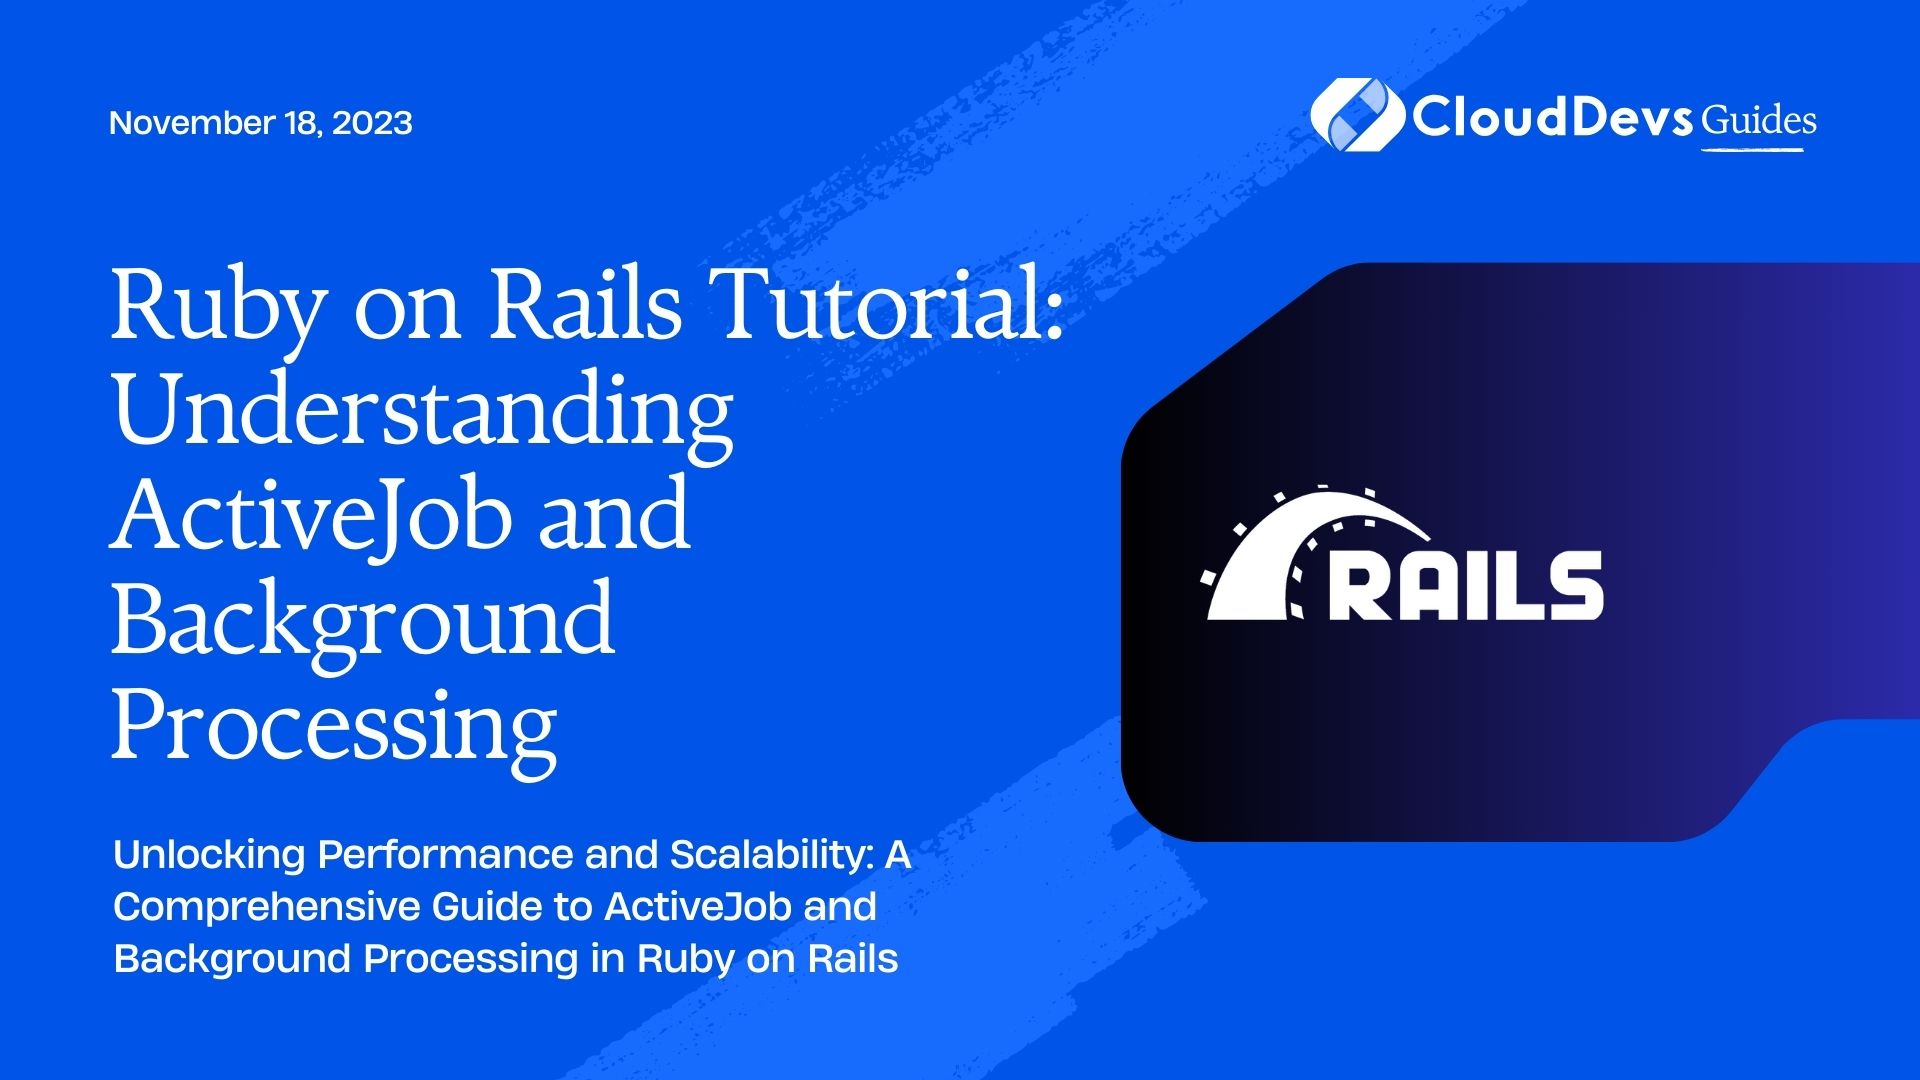 Ruby on Rails Tutorial: Understanding ActiveJob and Background Processing